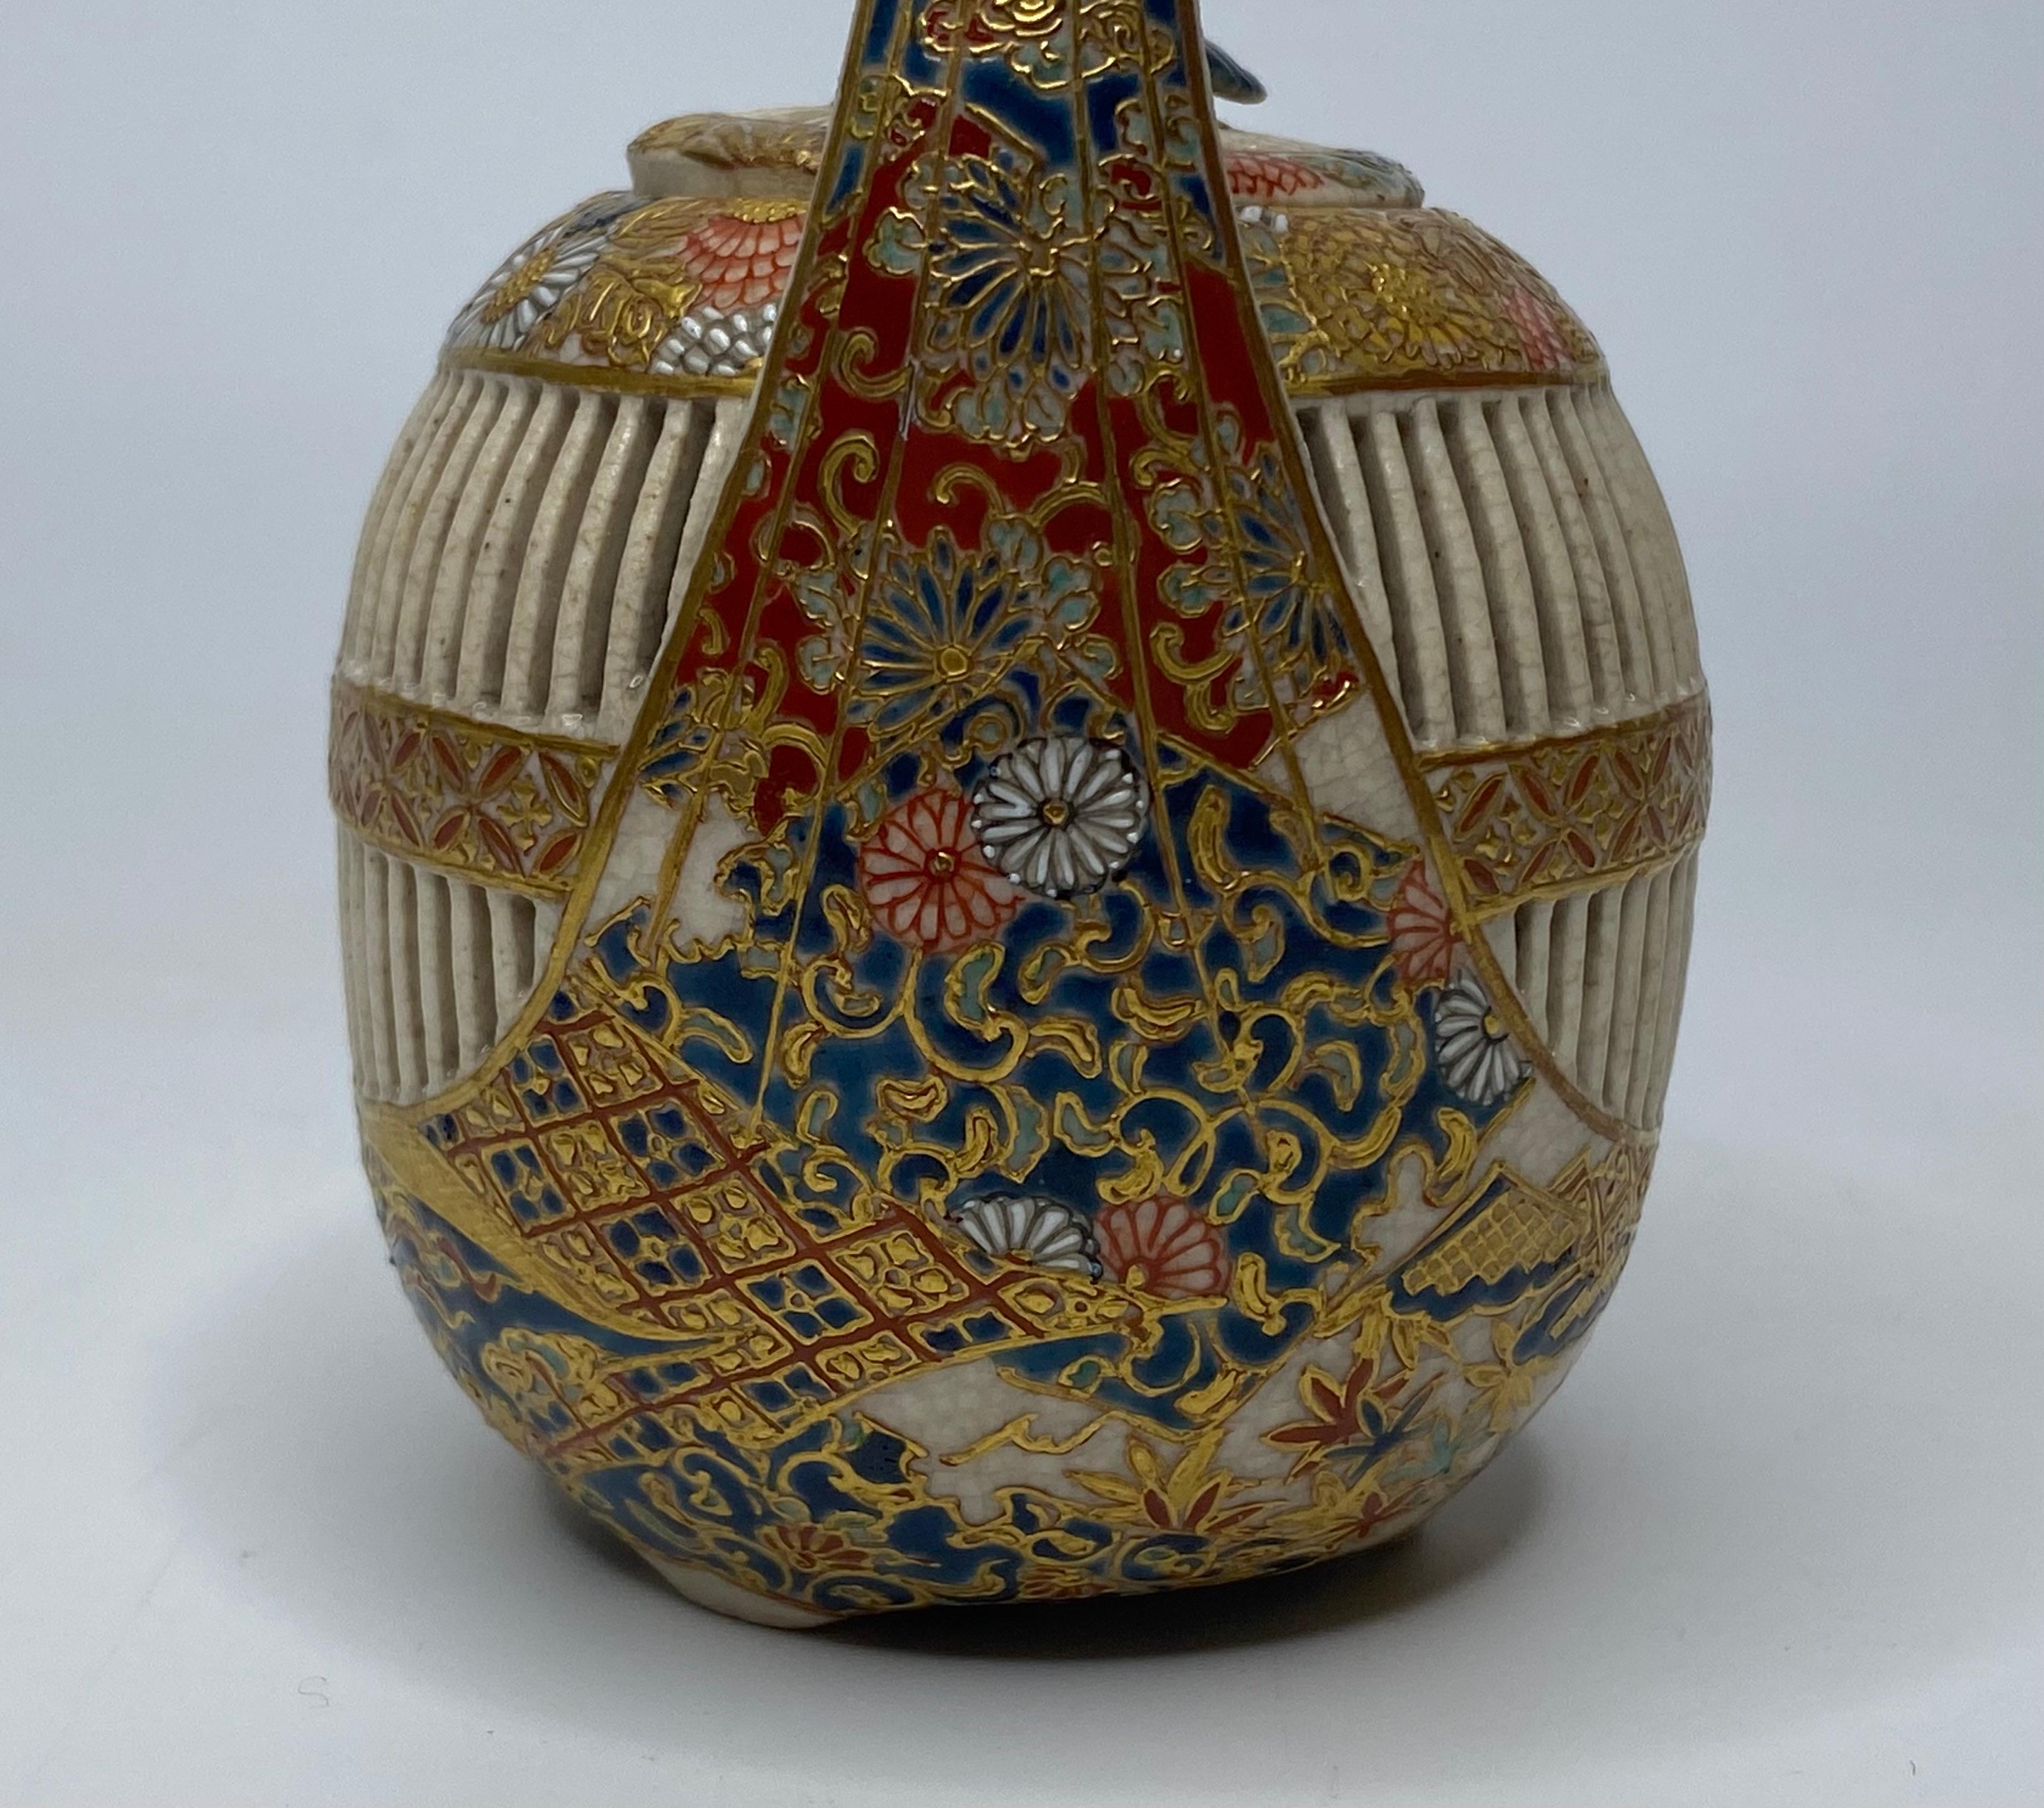 Late 19th Century Imperial Satsuma cricket cage, Japan, c. 1880, Meiji Period.